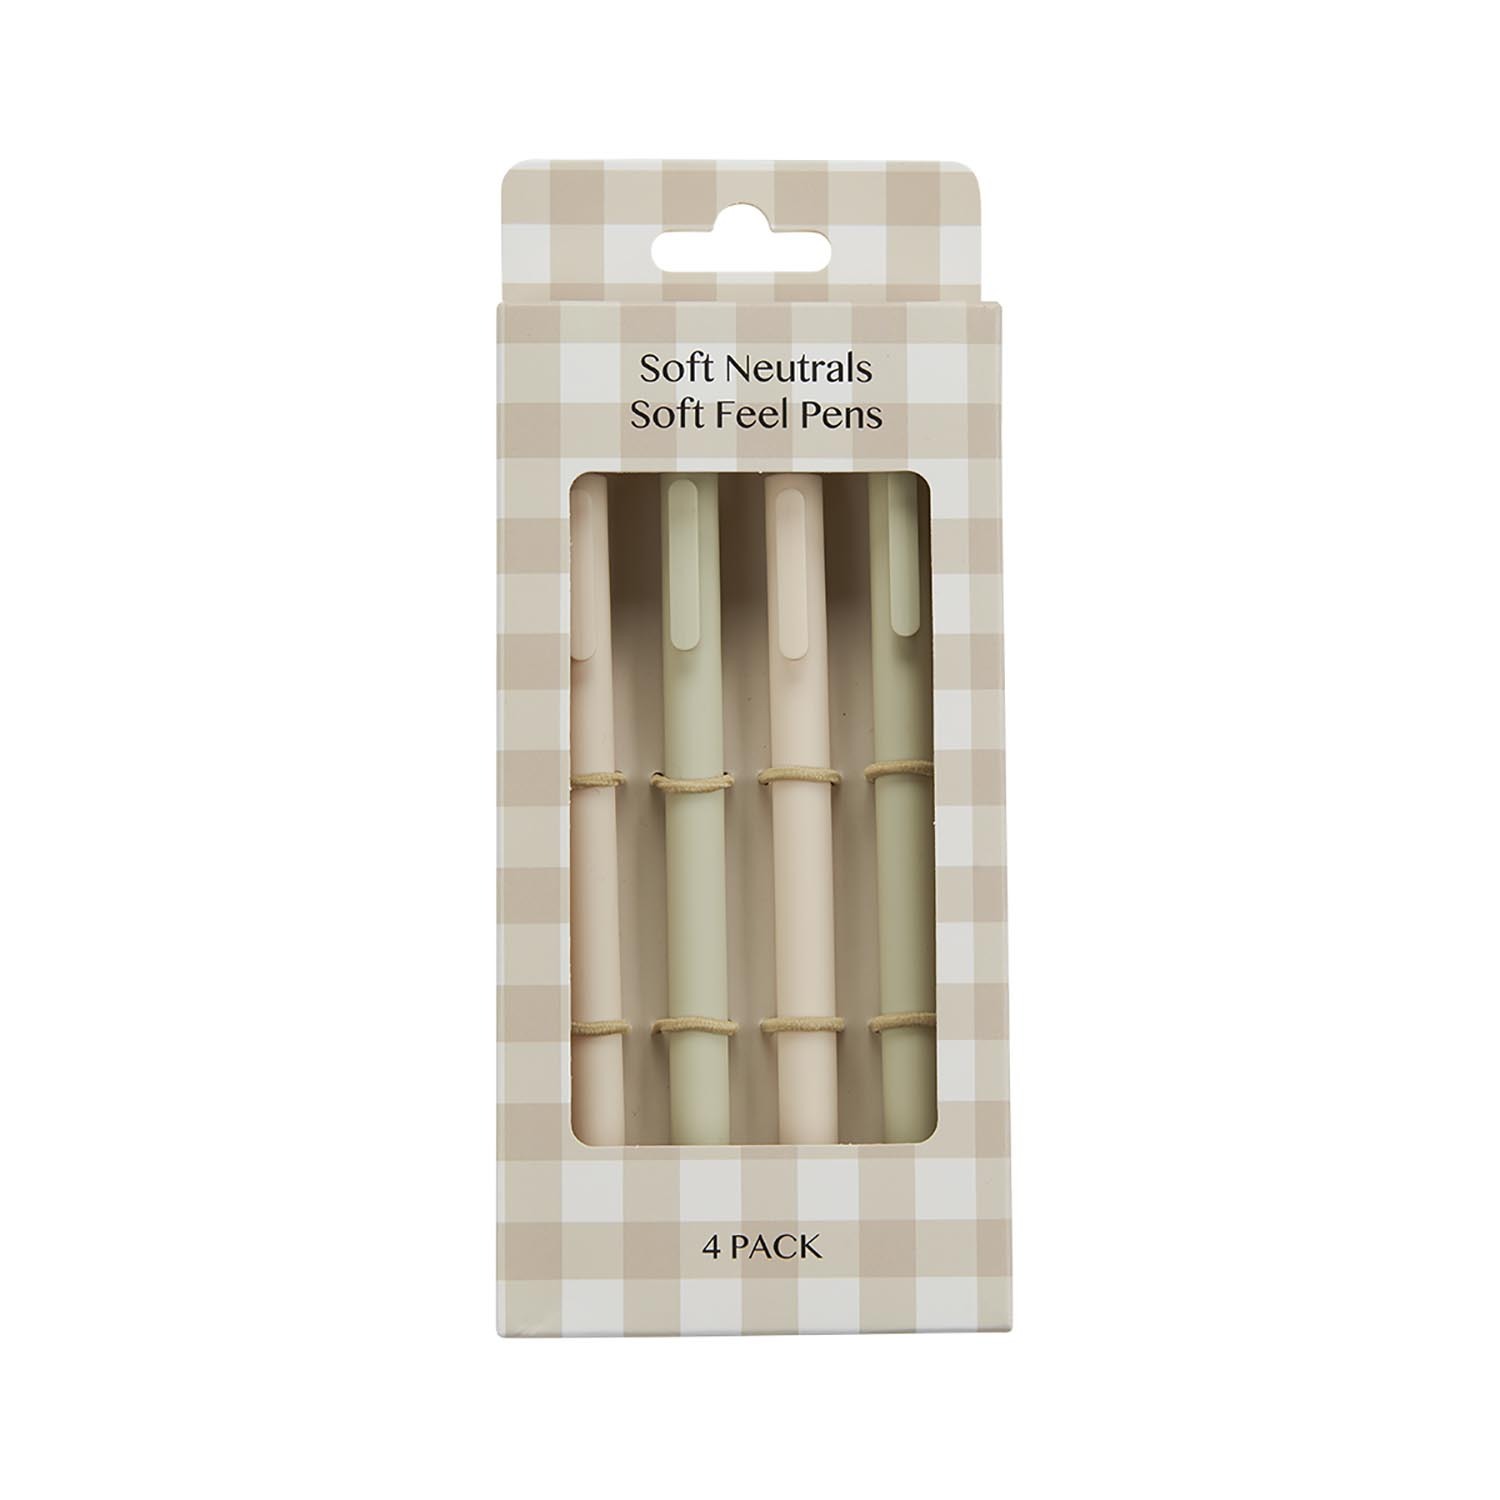 Pack of 4 Soft Neutrals Soft Feel Pens - Neutral Image